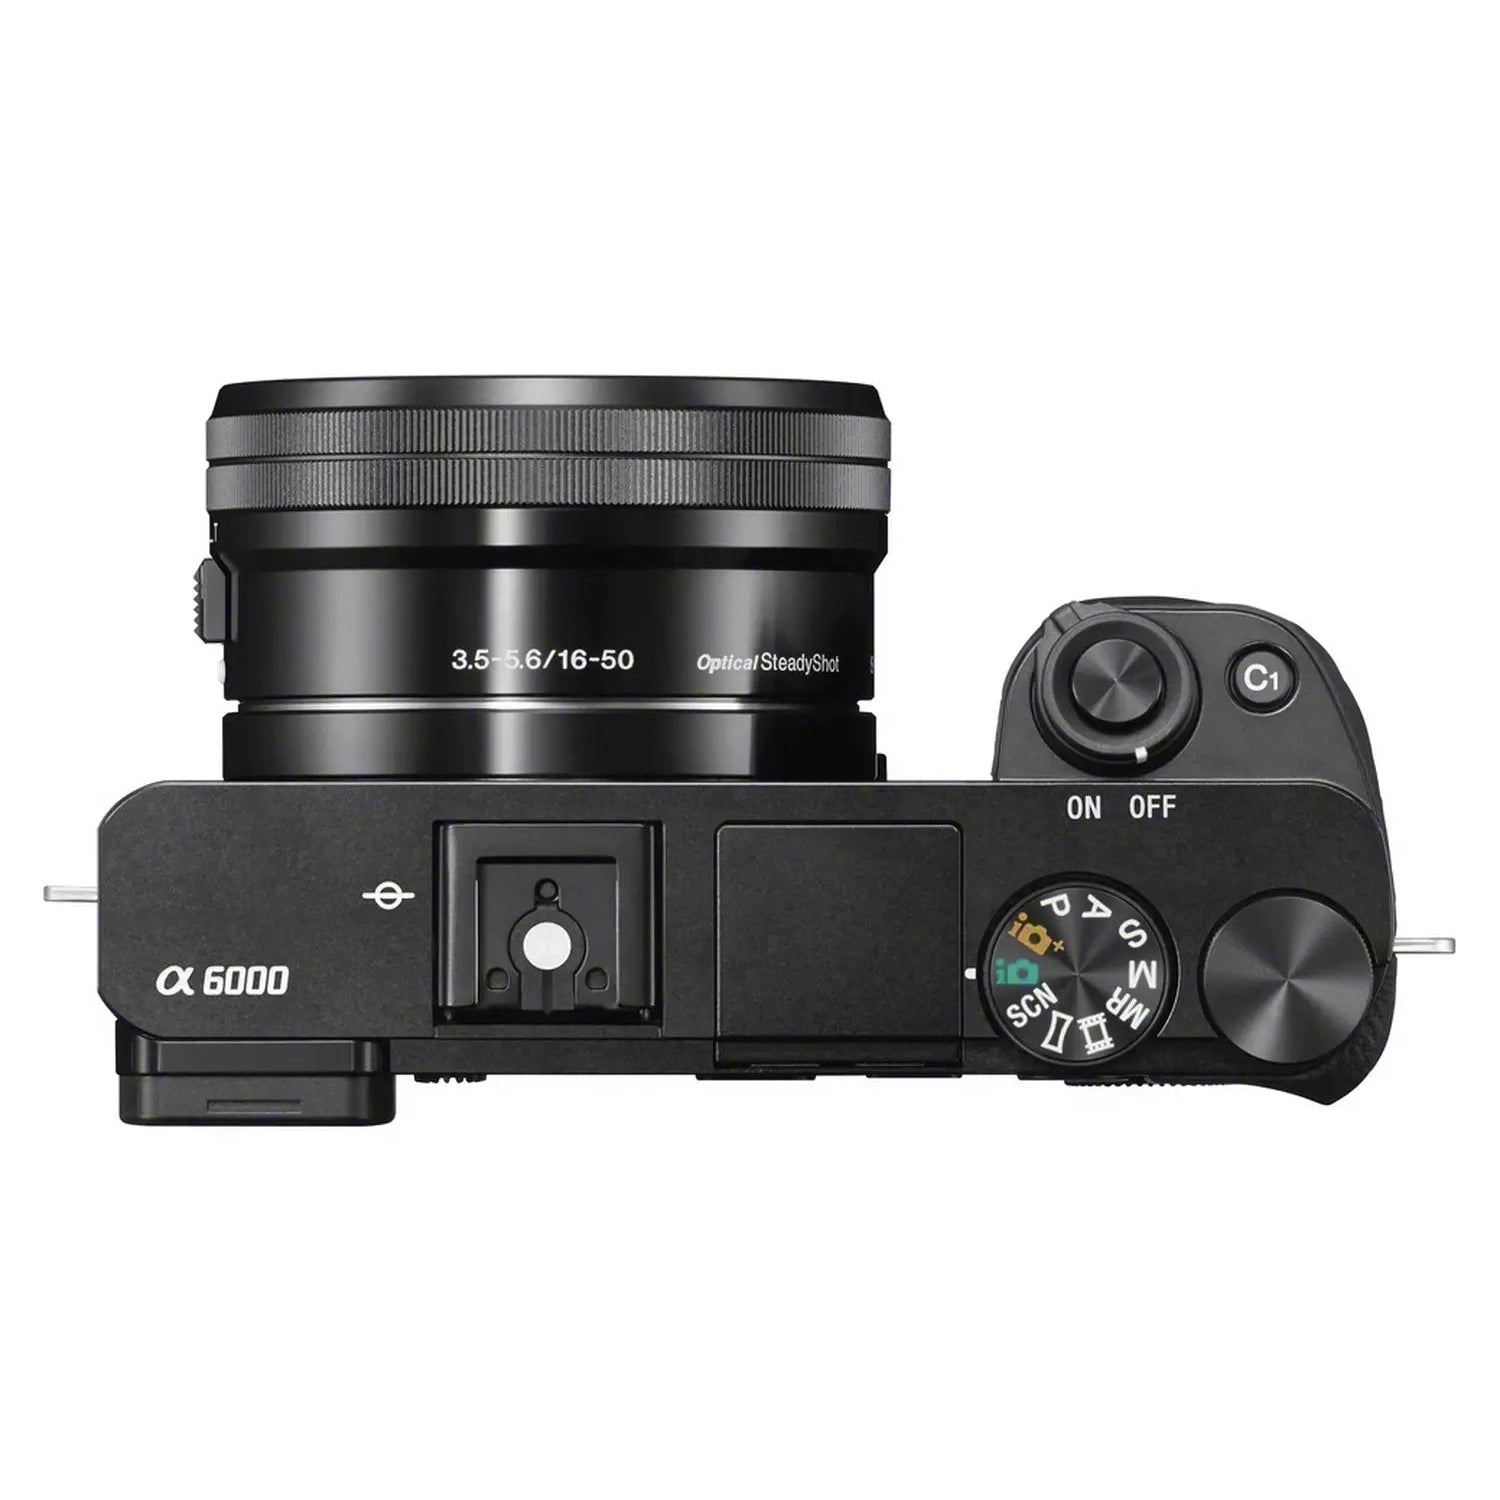 Sony A6000 Mirrorless Camera With 16-50mm Lens, Black - Refurbished Pristine